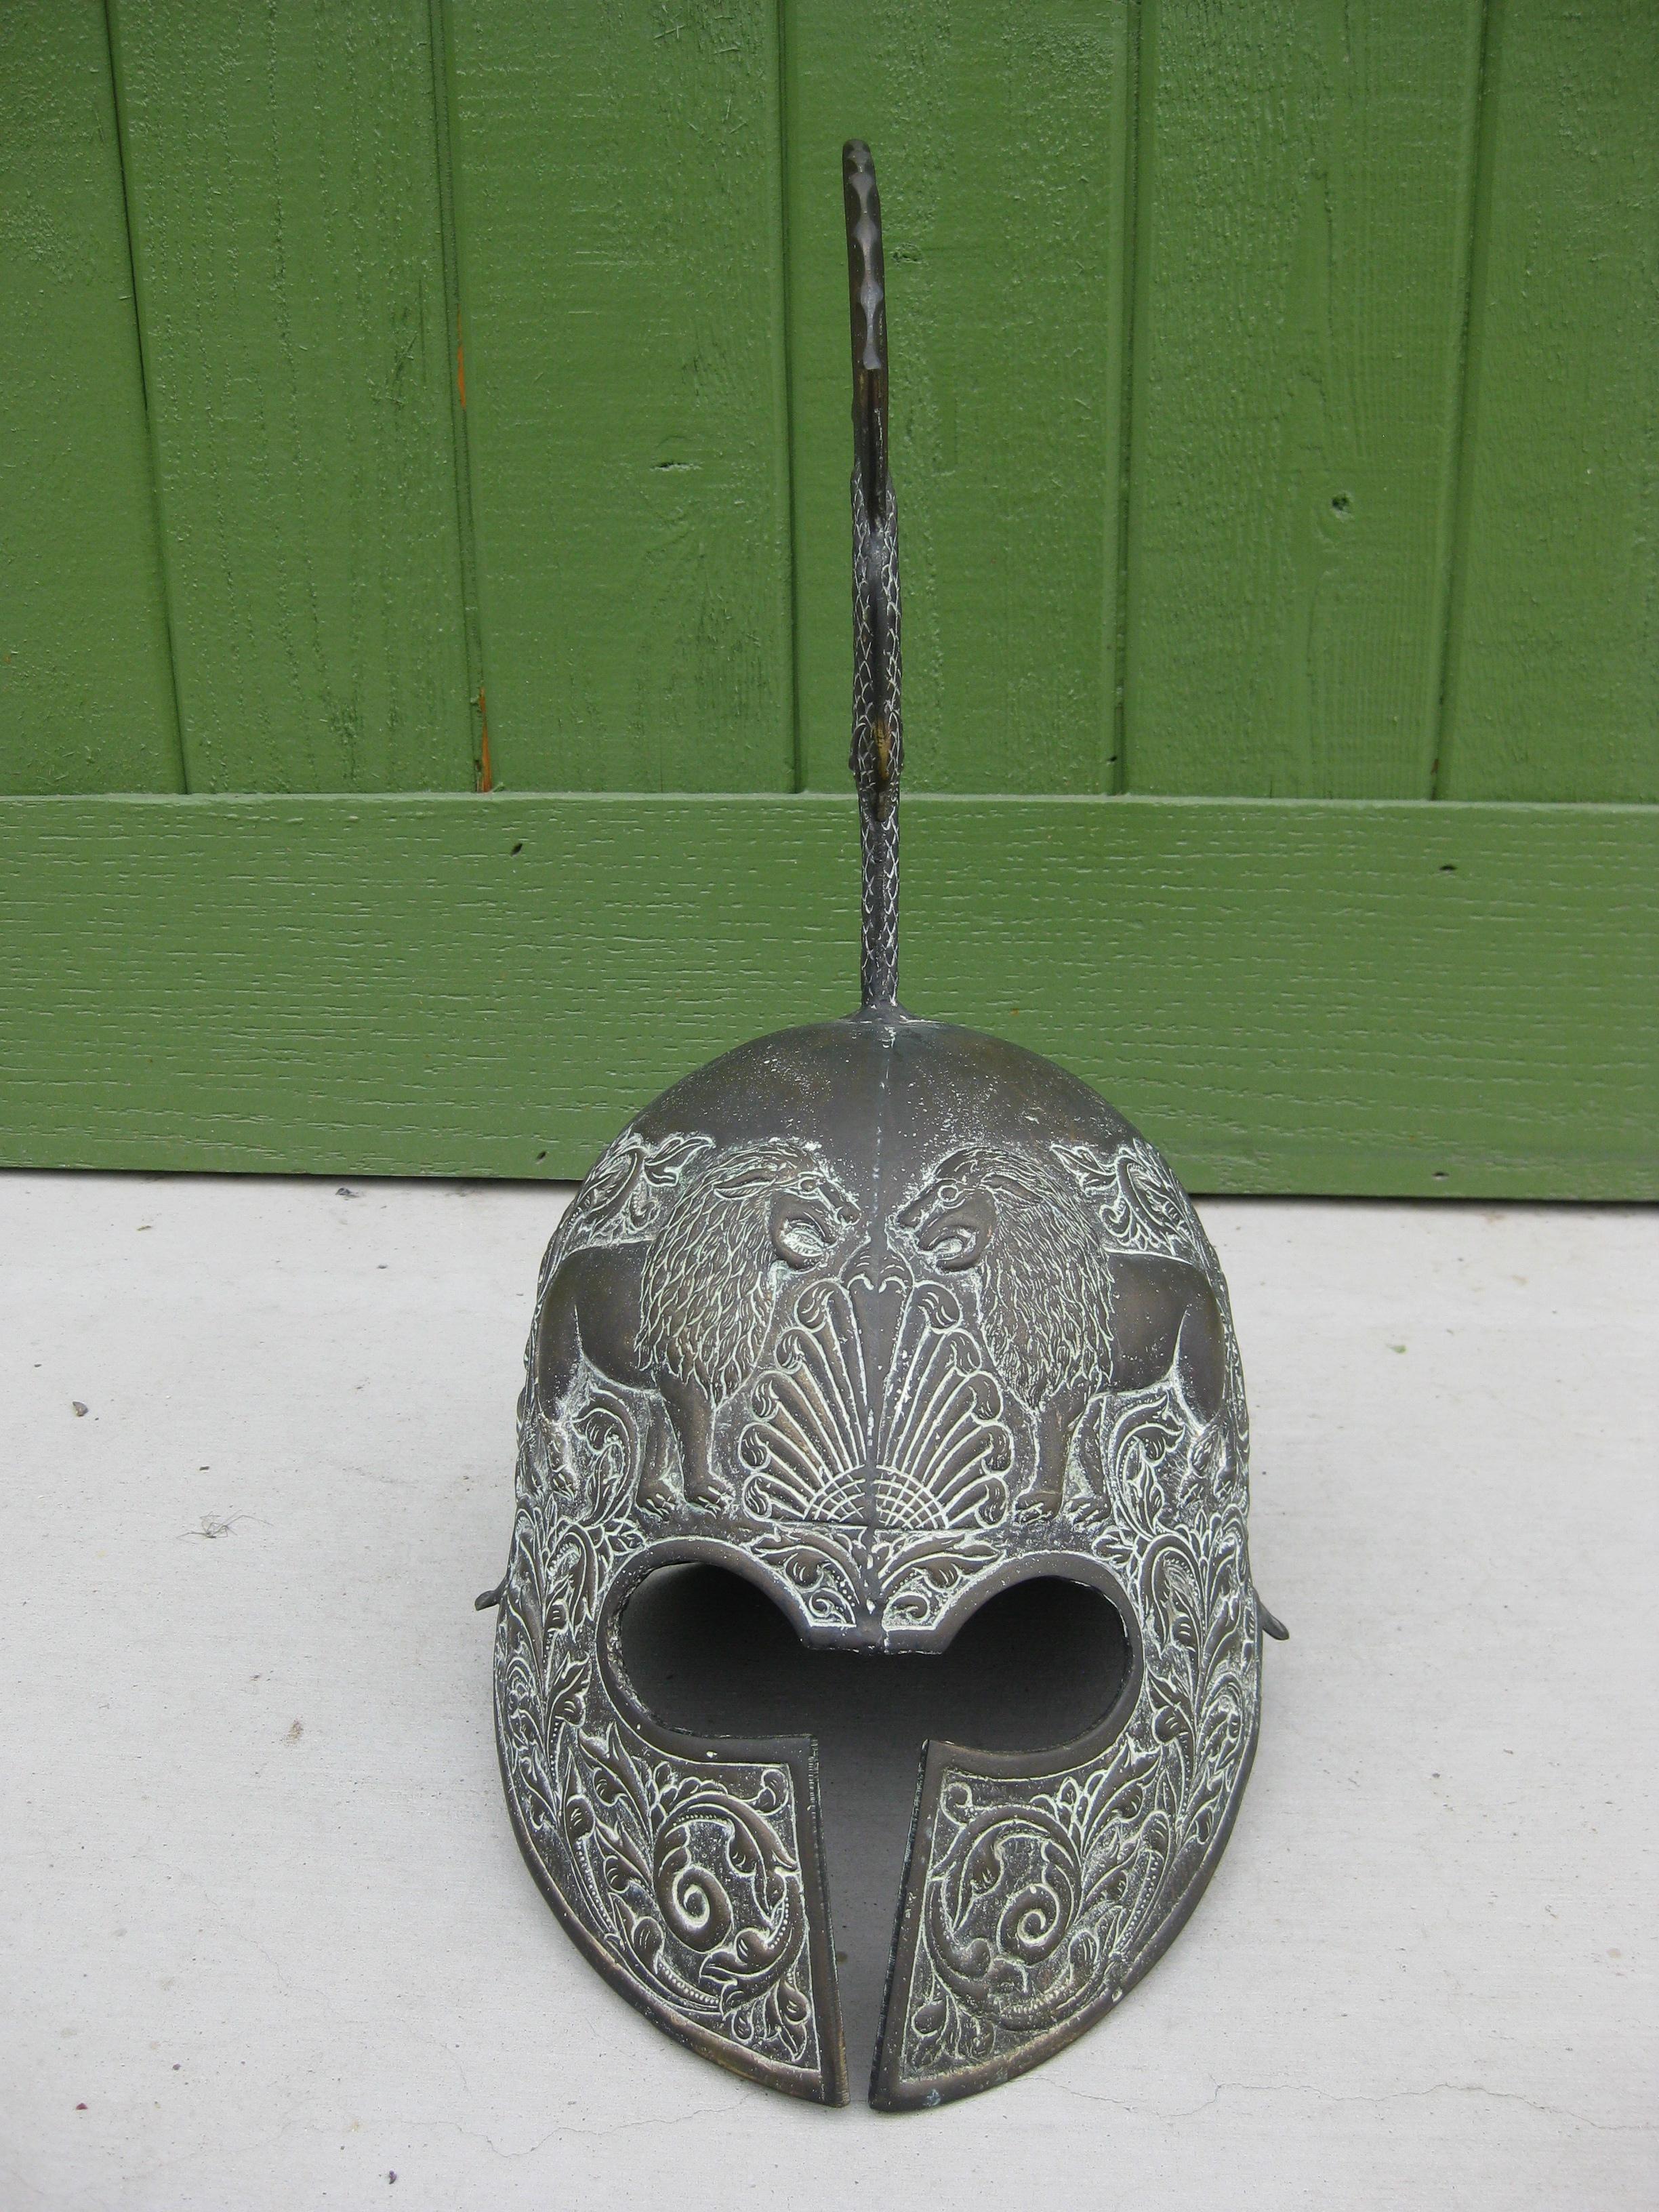 Exquisite hand crafted Greek bronze full size display helmet mode. This was made in the 1950's and probably from Italy. Wonderfull details and patina. Great design and form. No signatures or maker marks. In excellent original condition. Measures